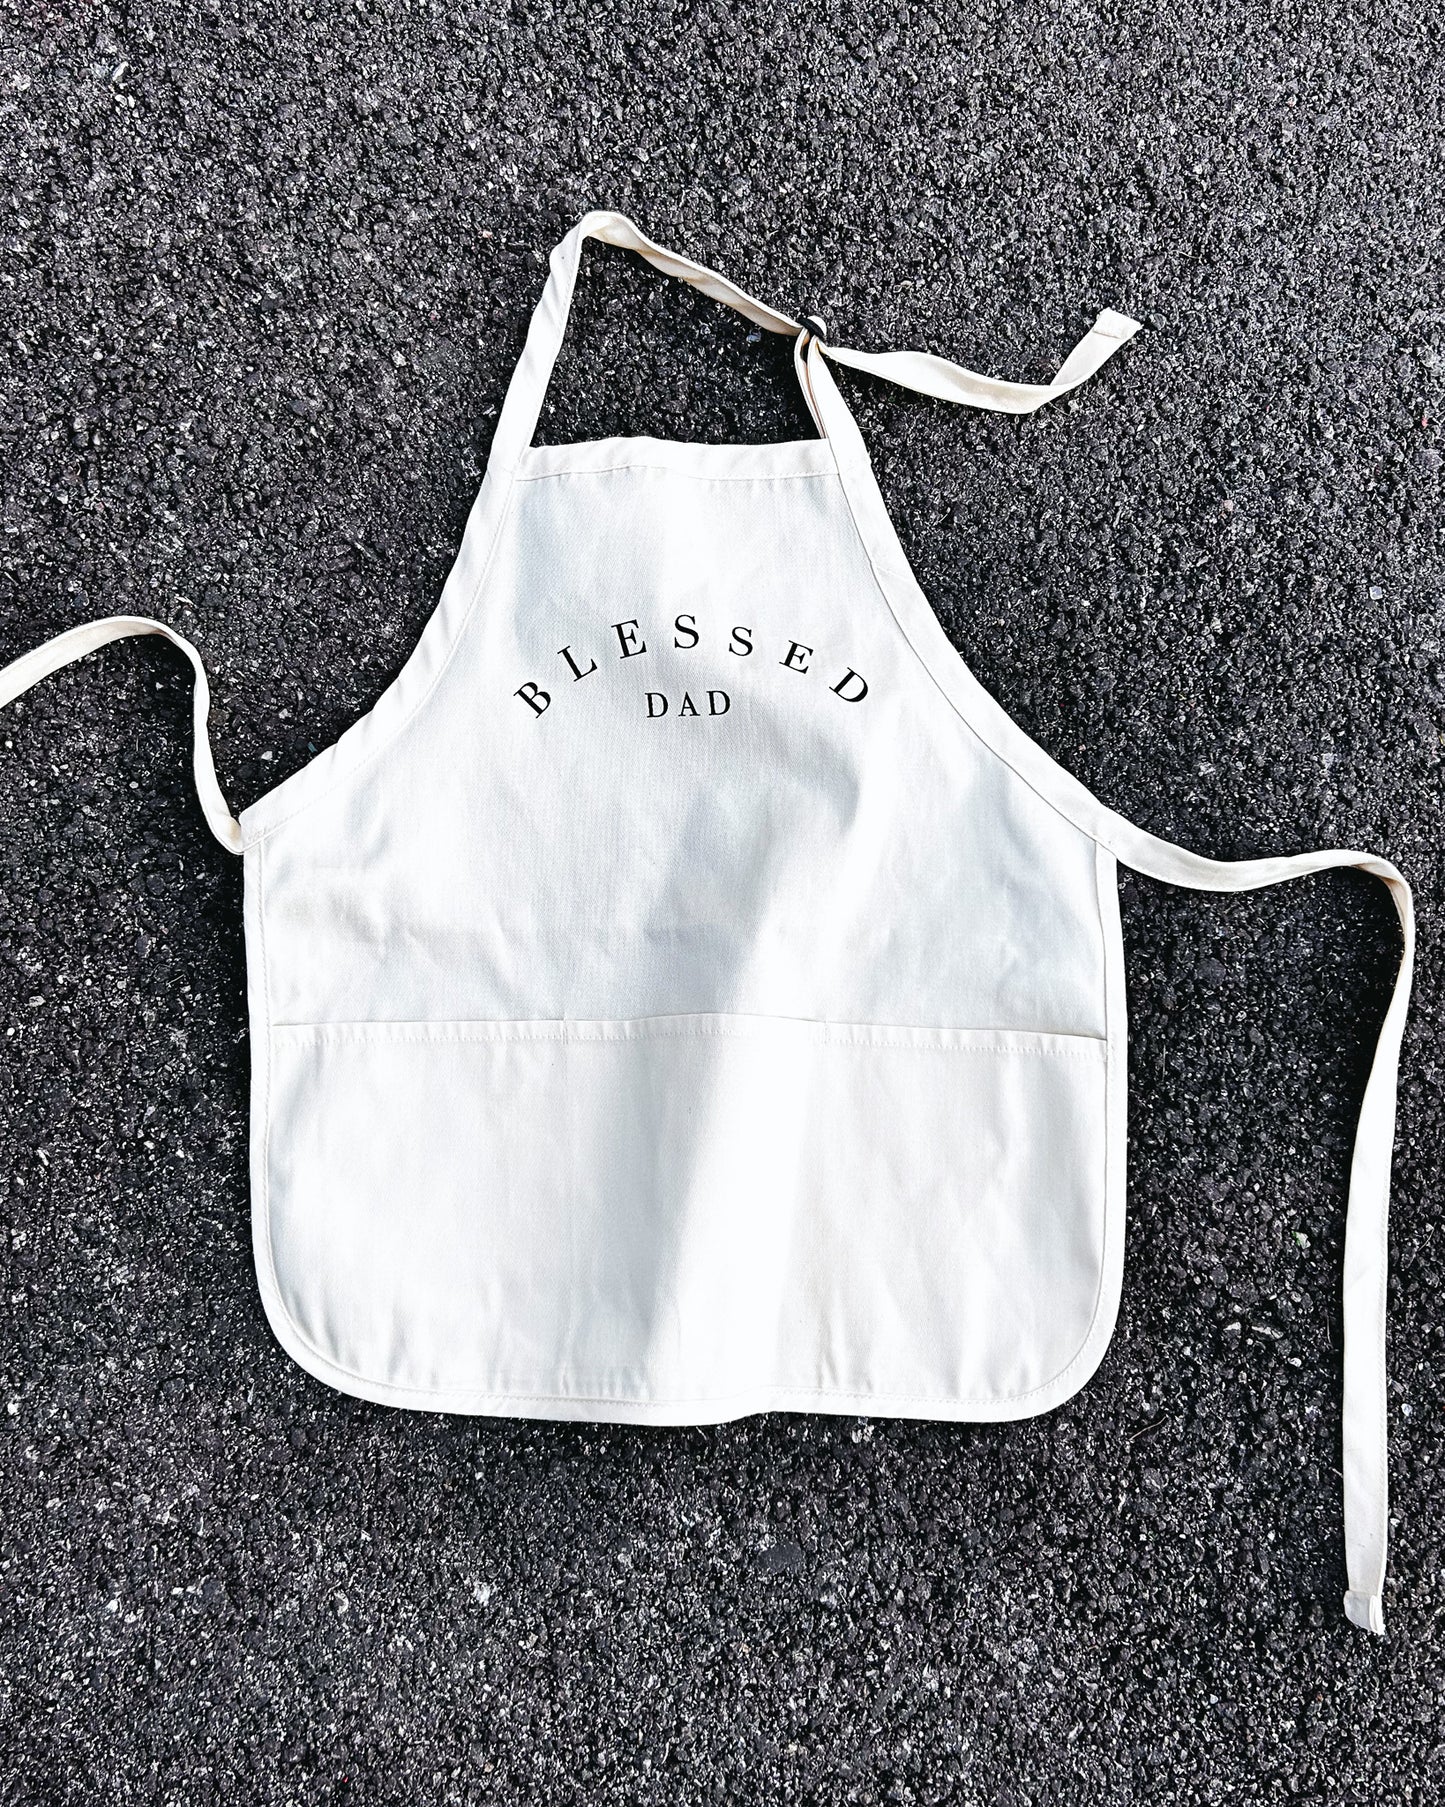 Blessed Dad Full-Length Apron with Pockets